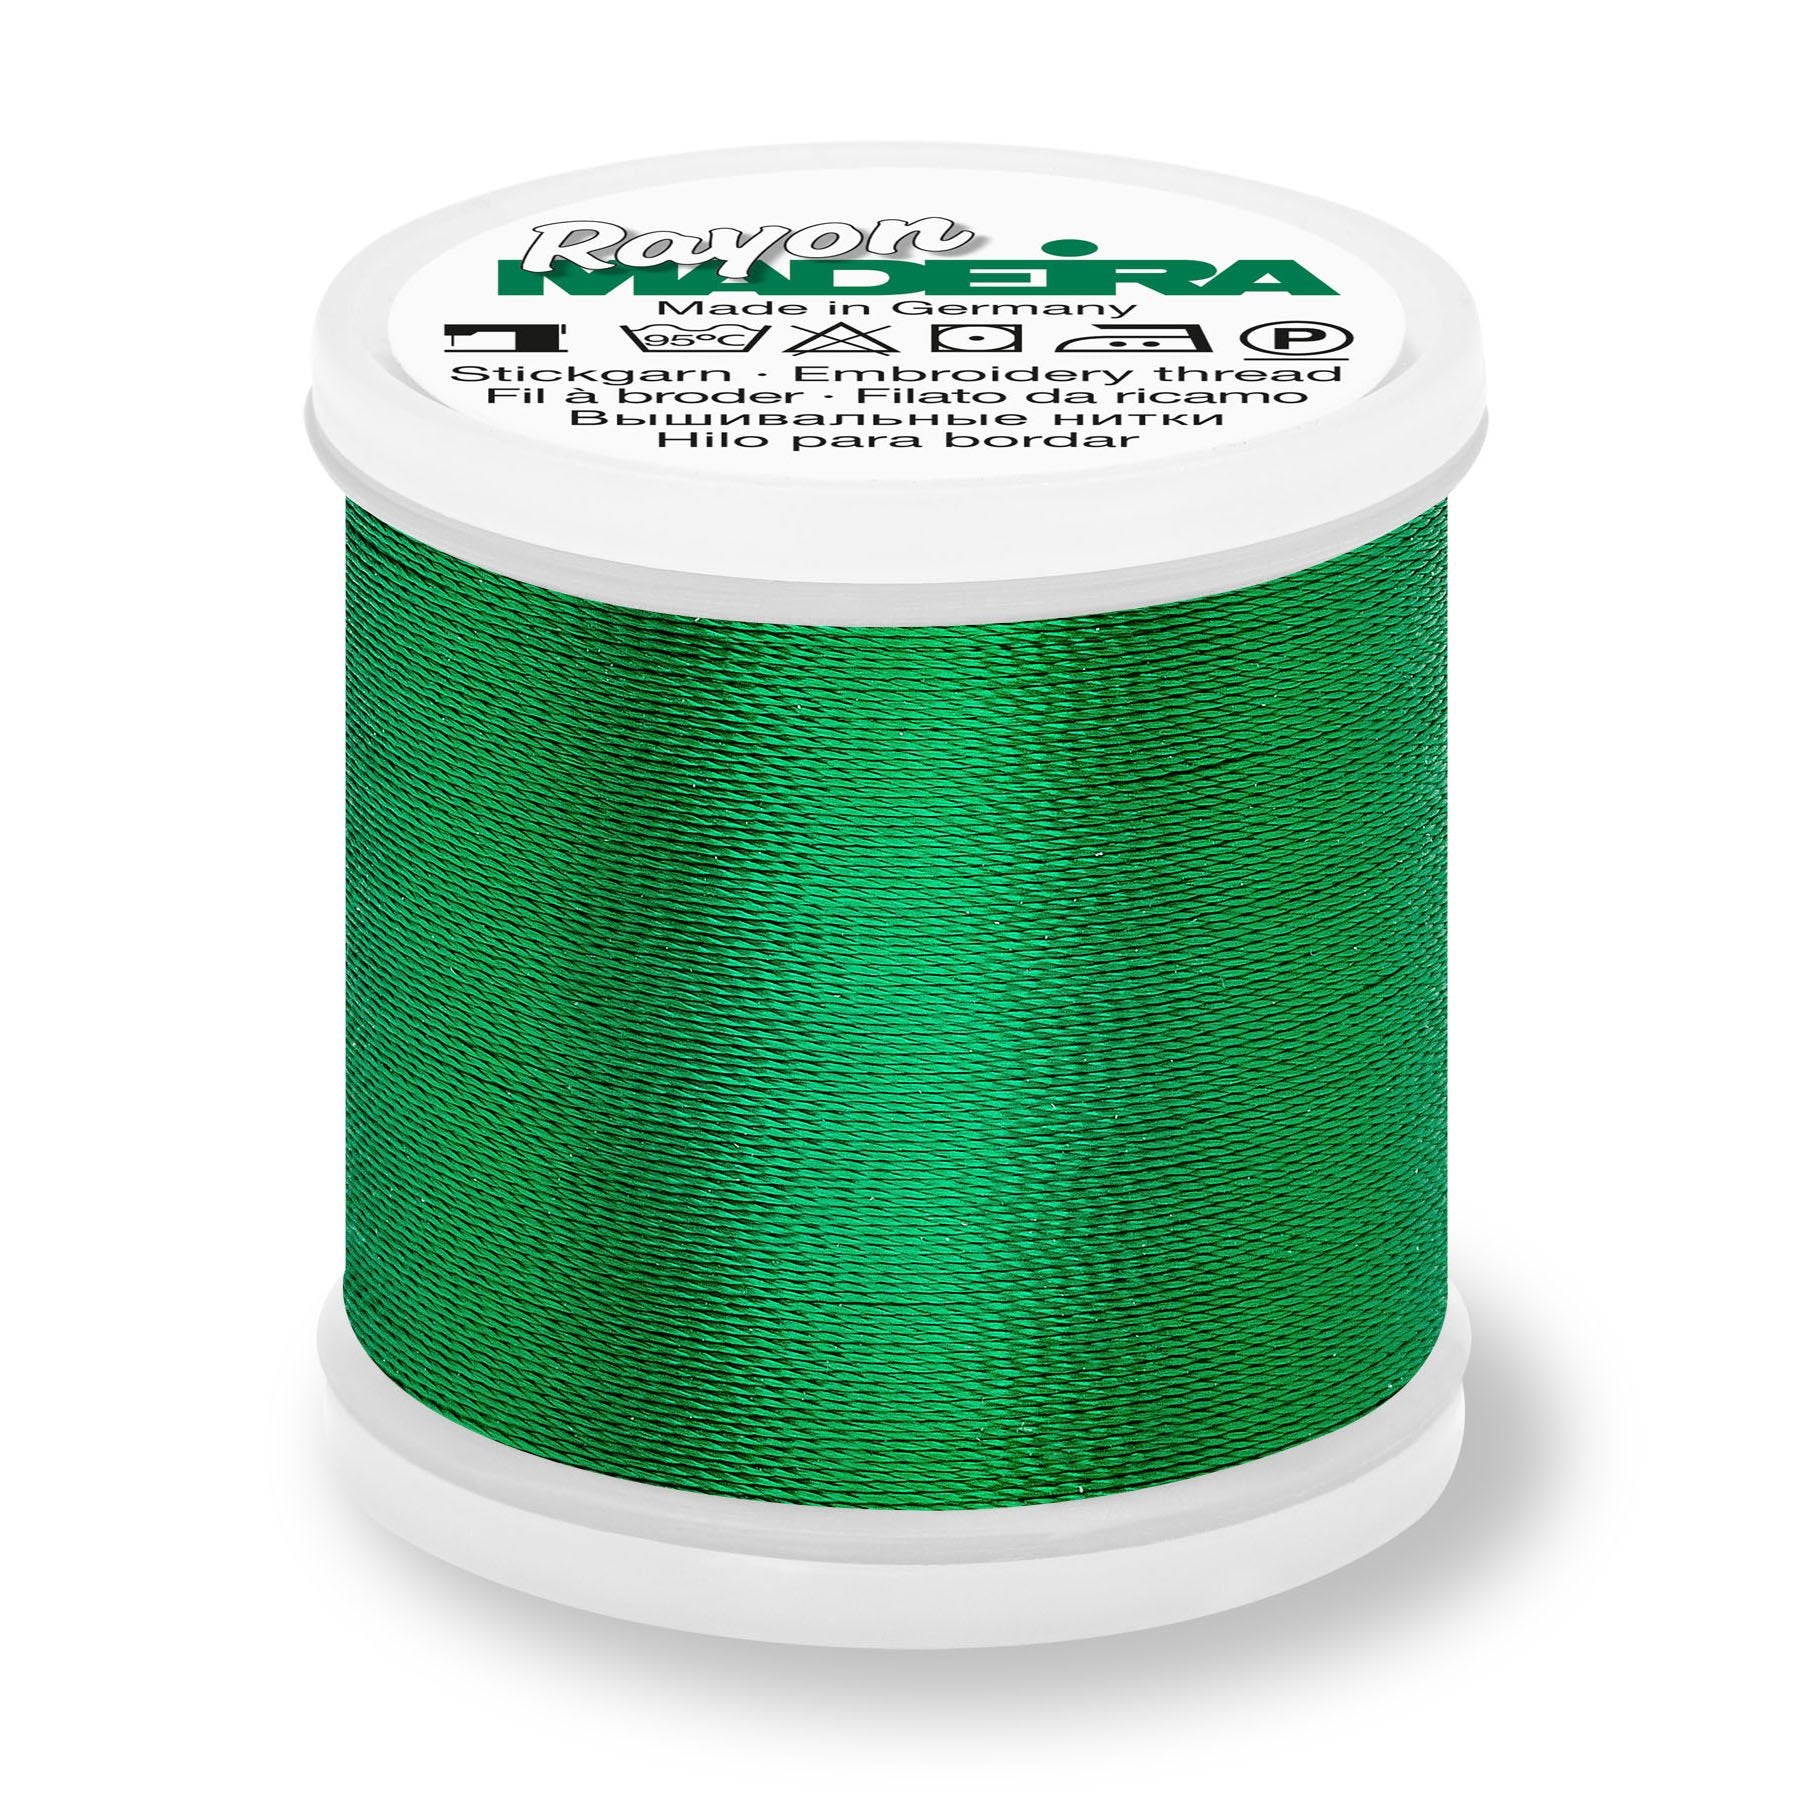 Madeira Rayon 40 Embroidery Thread 200m #1250 Deep Emerald from Jaycotts Sewing Supplies